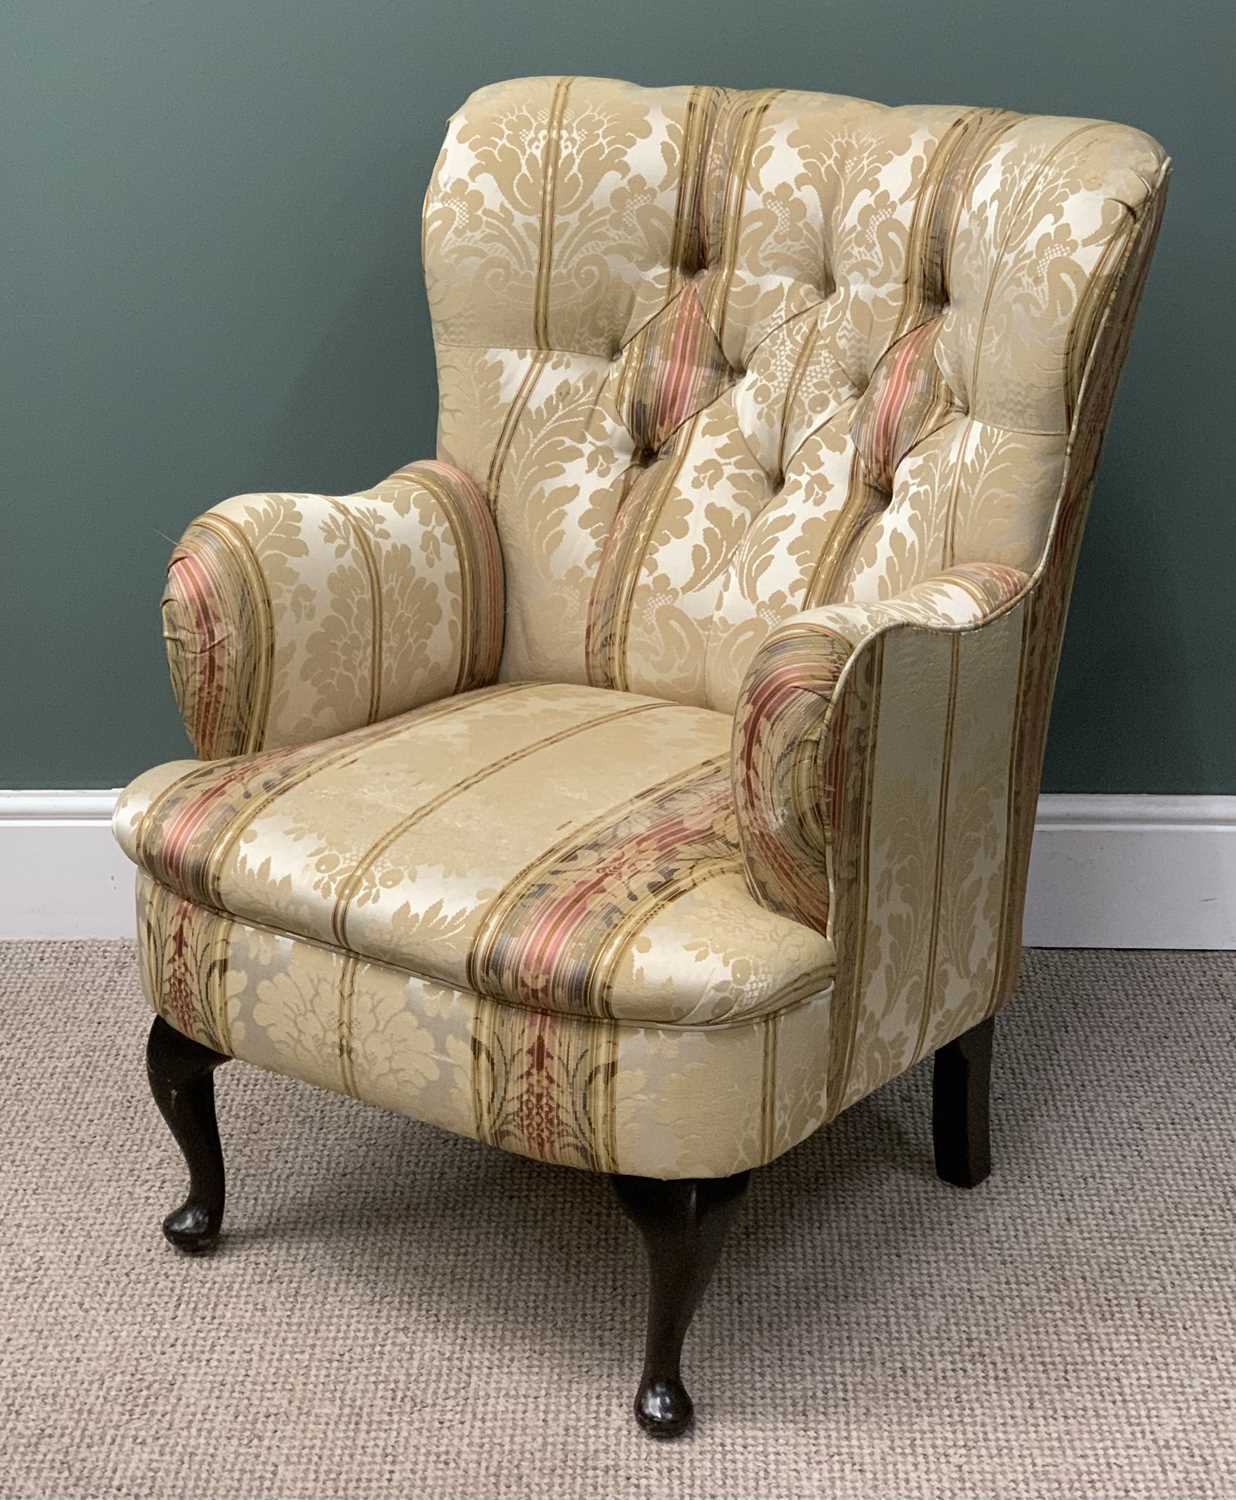 VINTAGE BUTTON BACK & UPHOLSTERED EASY CHAIR, 91 (h) x 66 (w) x 50 (d) cms Provenance: Private